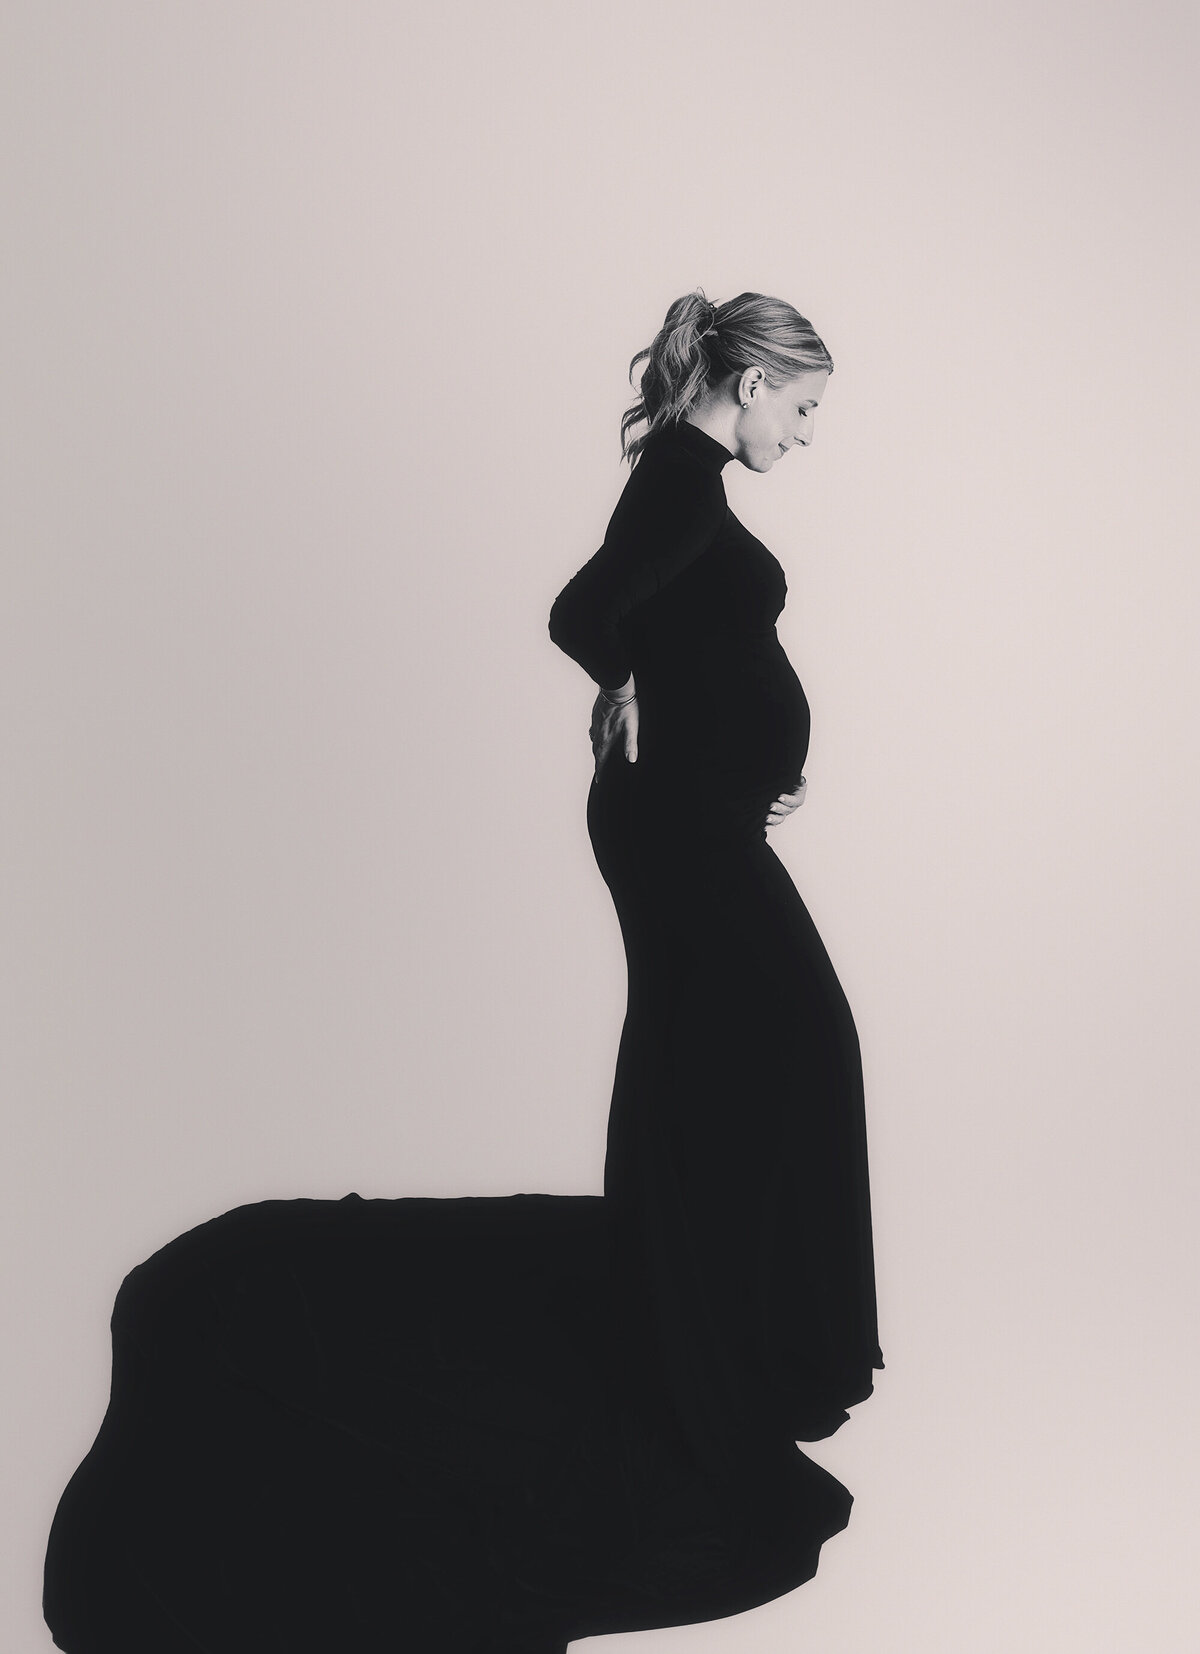 Pregnant woman poses for Studio Maternity Photos in Asheville, NC.